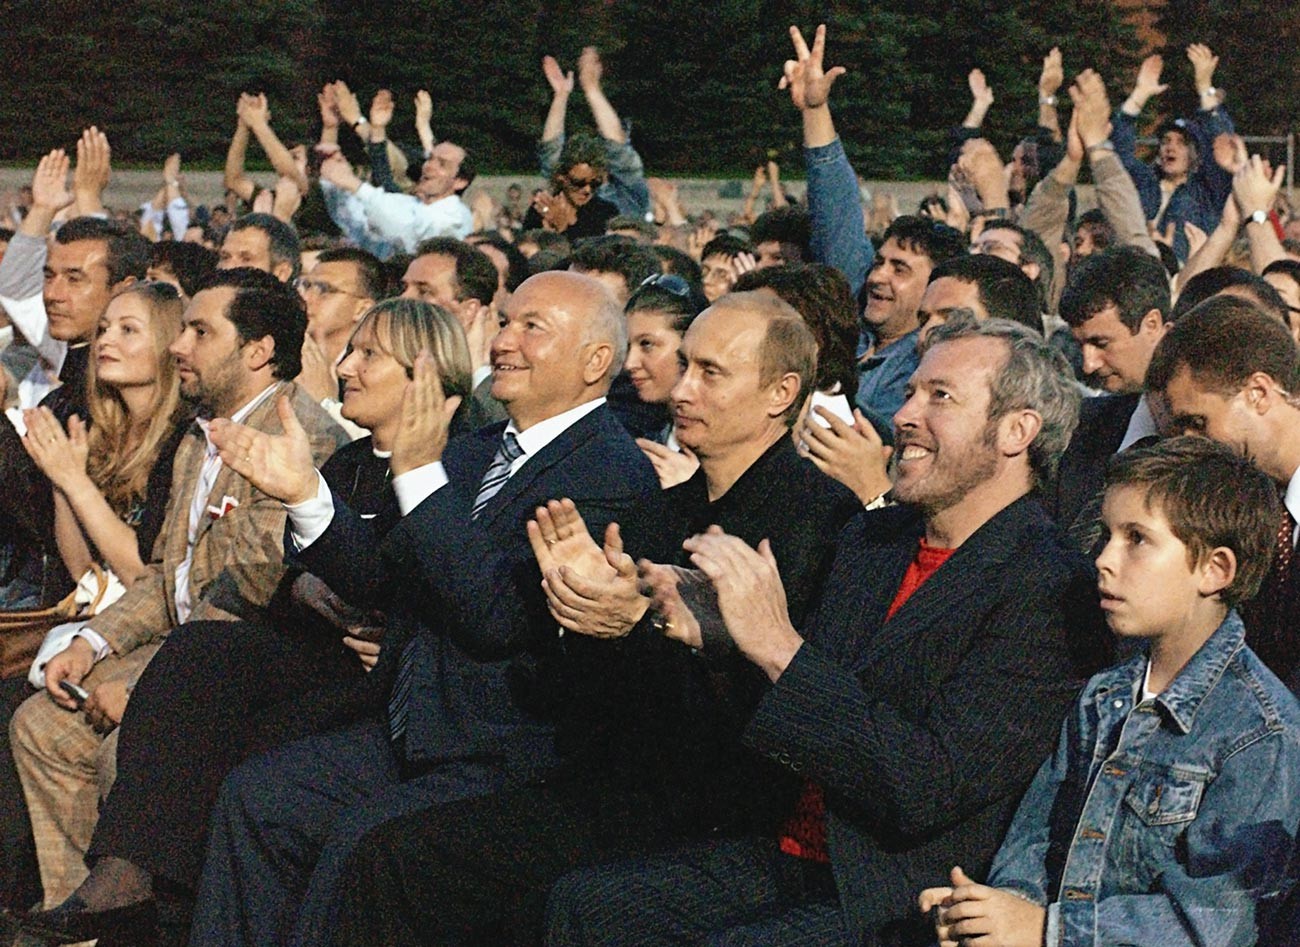 Pictured L-R: Yuri Luzhkov (Moscow mayor at the time), Vladimir Putin and famous Russian rock musician Andrei Makarevich attending McCartney's concert on Red Square